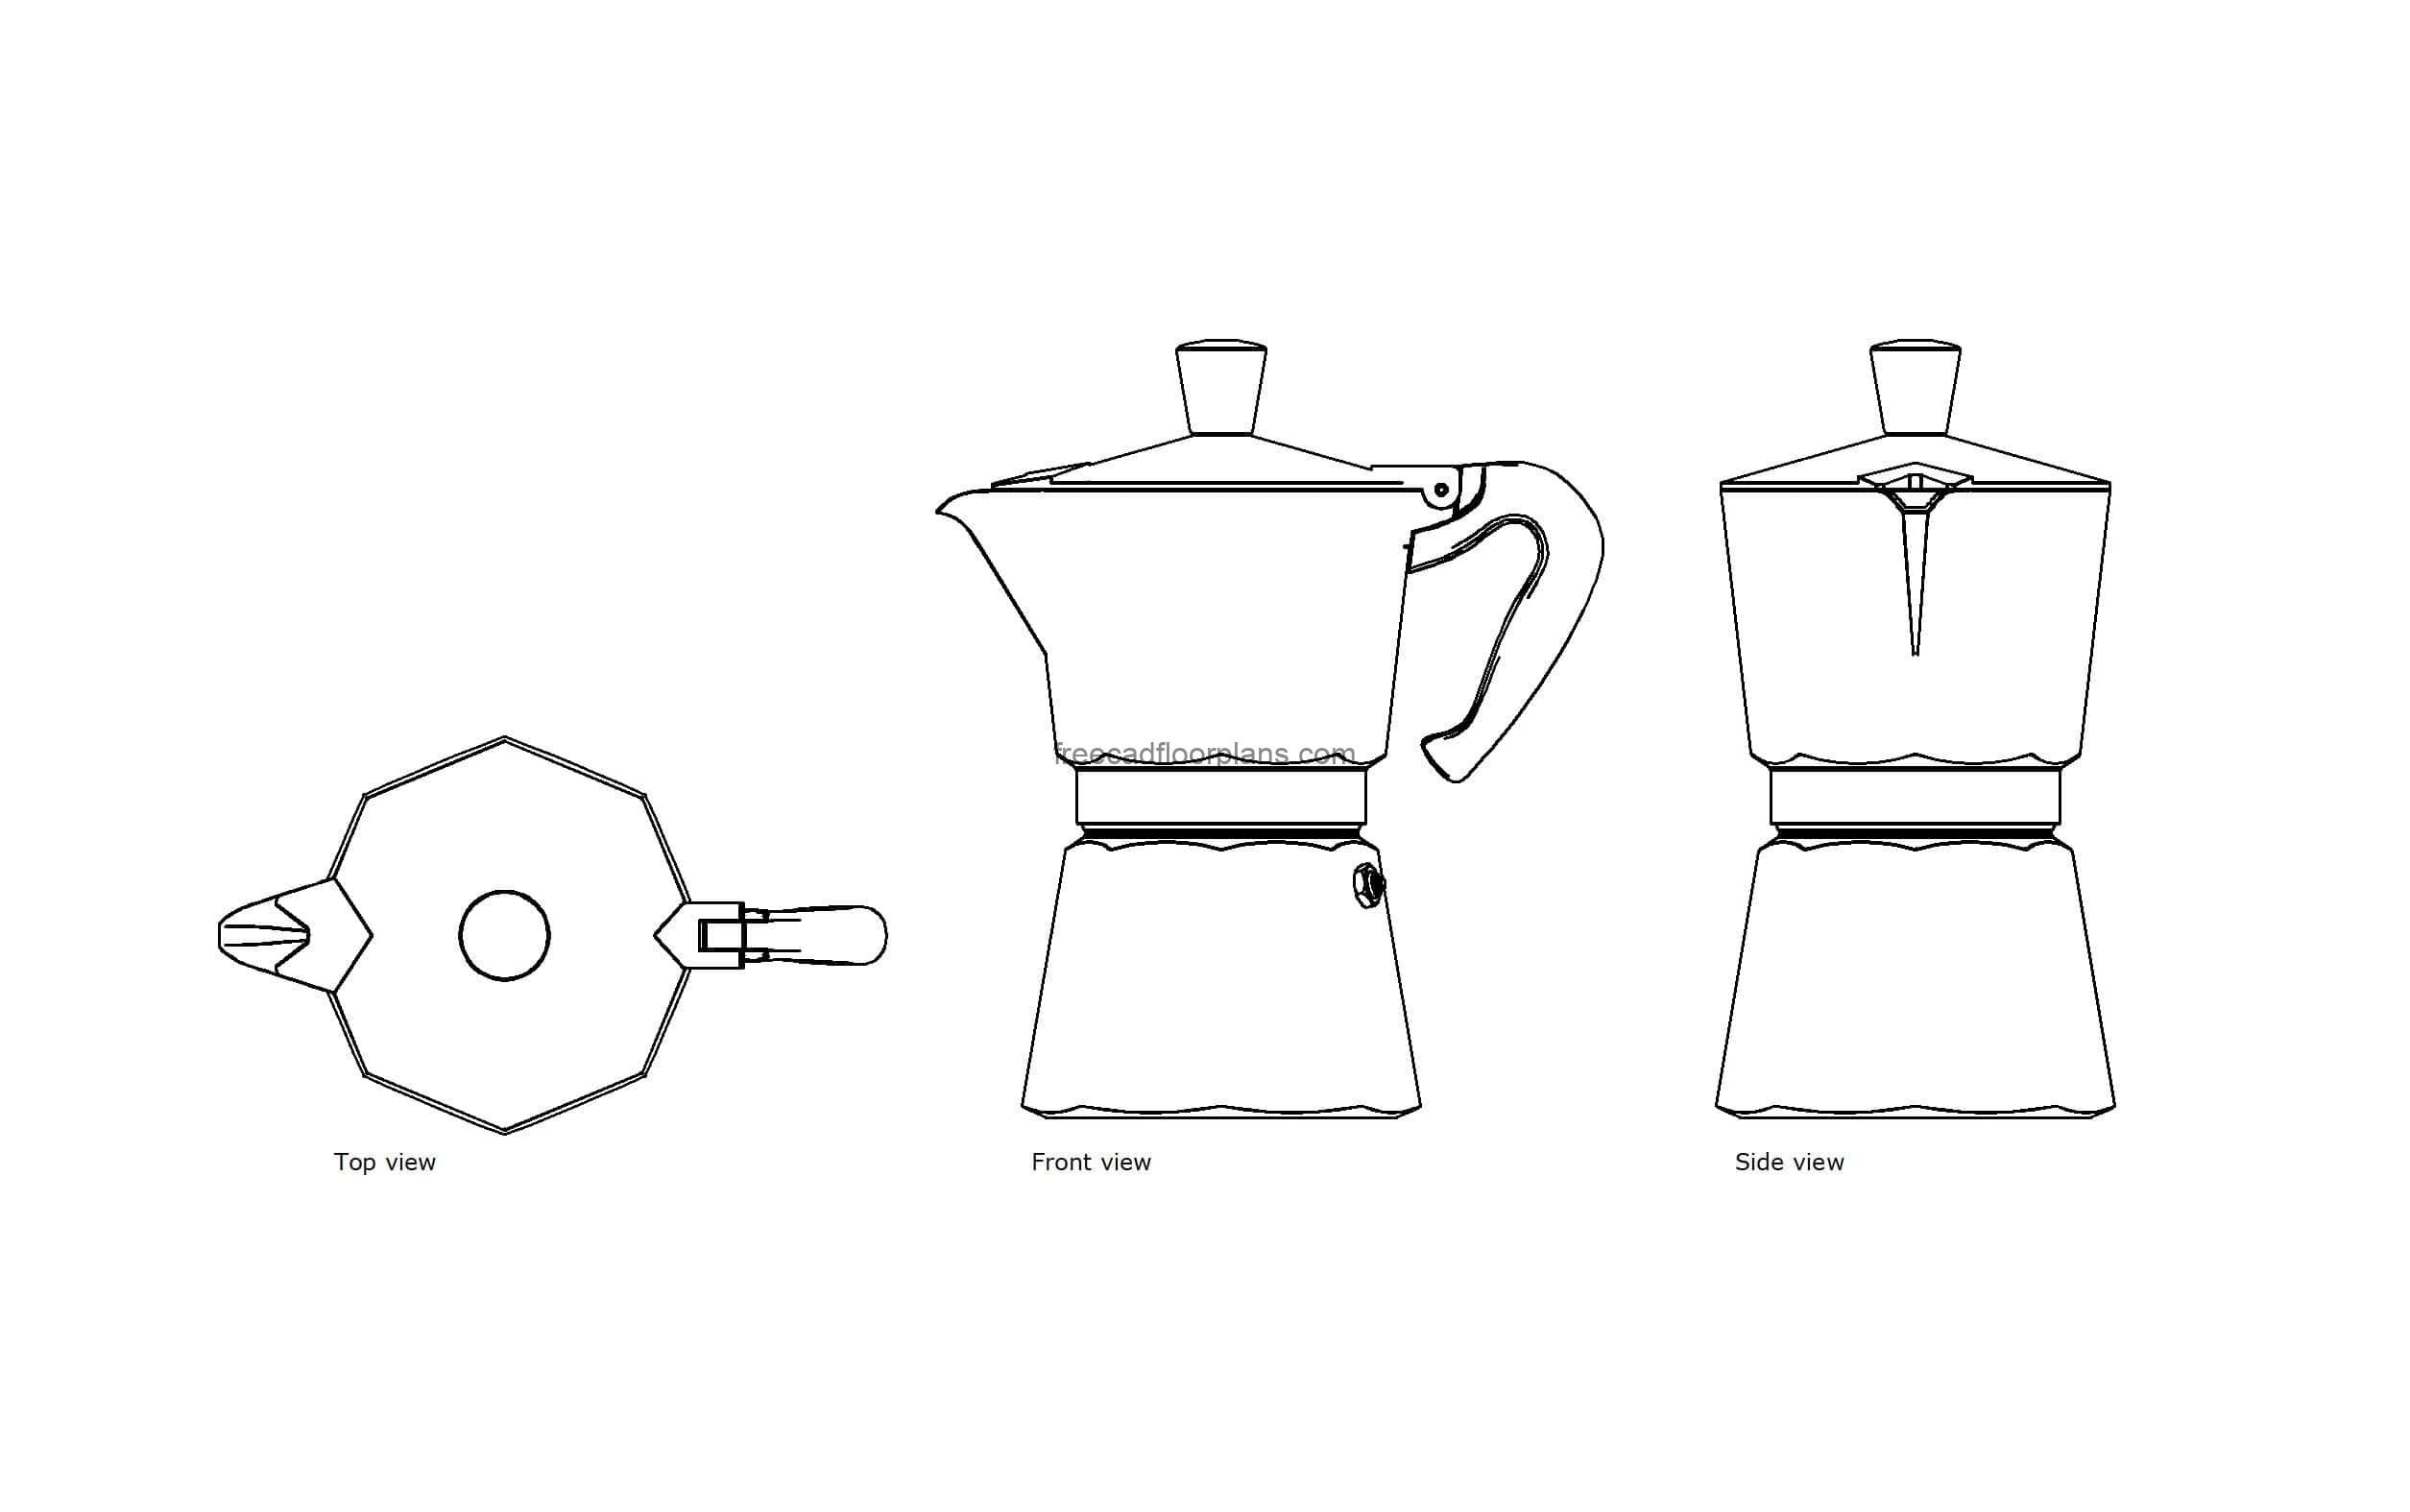 autocad drawing of a traditional coffee maker, plan and elevation 2d views, dwg file free for download